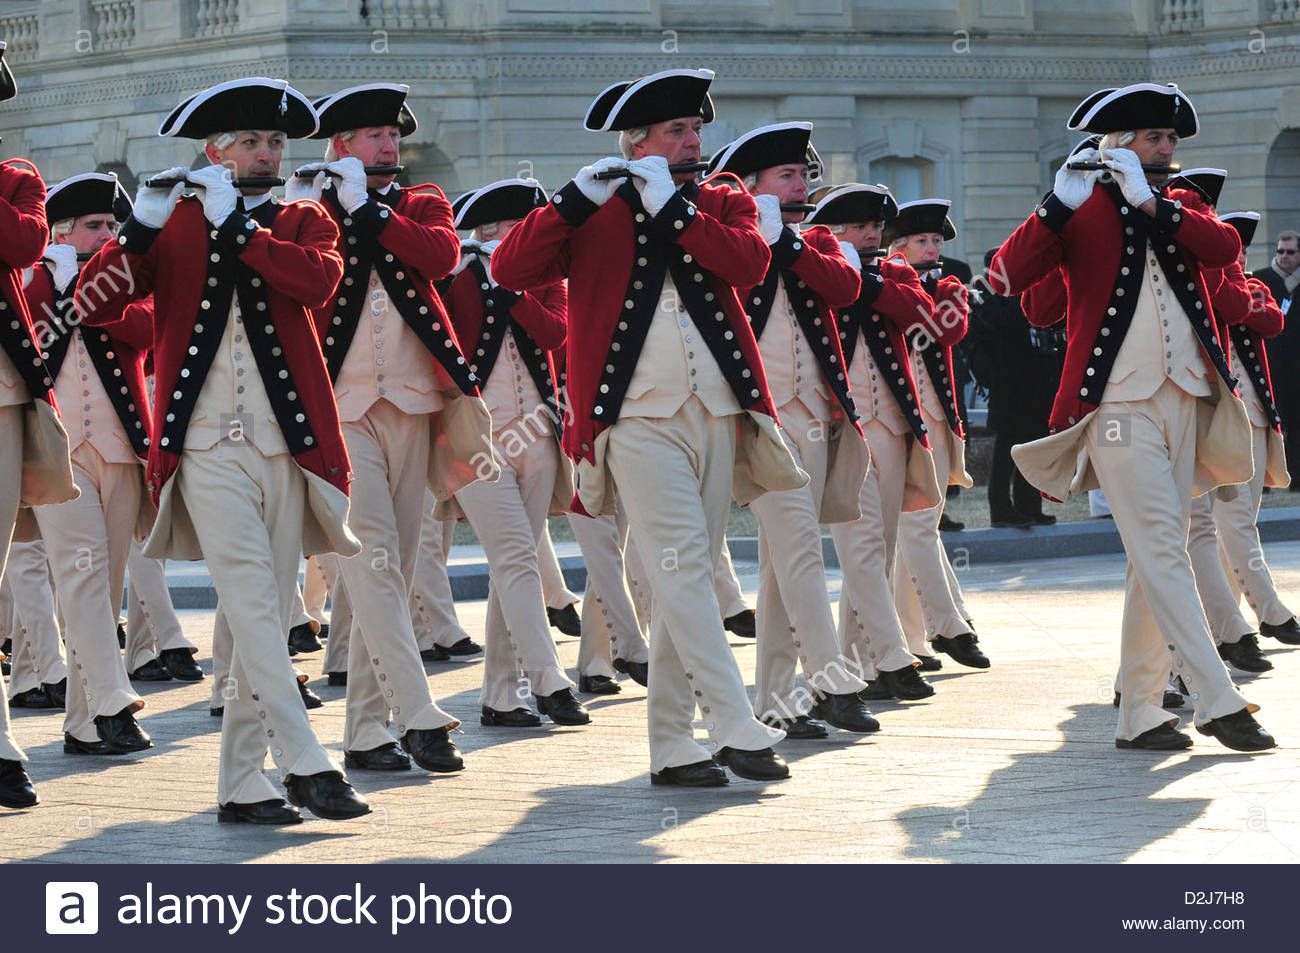 the-us-armys-old-guard-fife-and-drum-corps-passes-in-review-at-the-D2J7H8.jpg